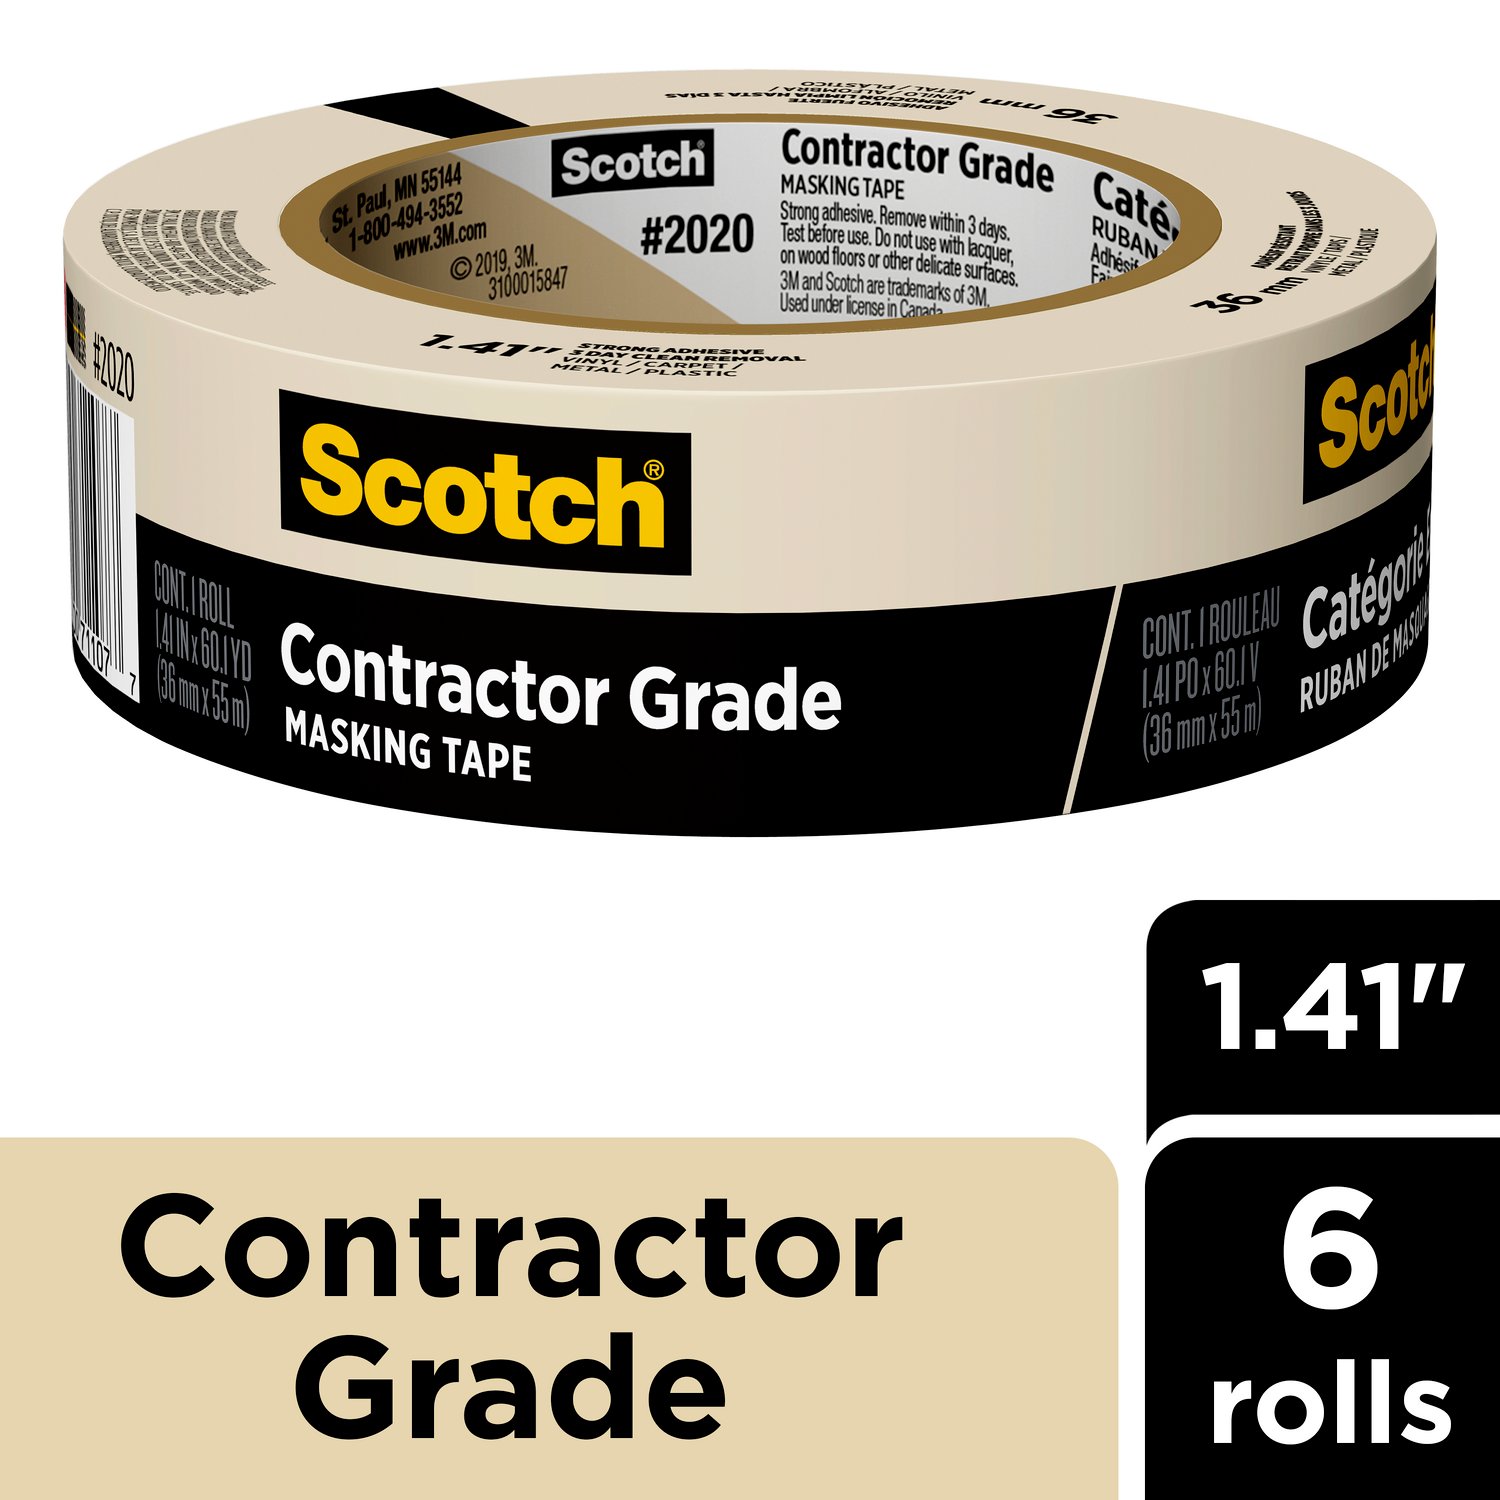 7100187756 - Scotch Contractor Grade Masking Tape 2020-36AP6, 1.41 in x 60.1 yd (36mm x 55m), 6 rolls/pack